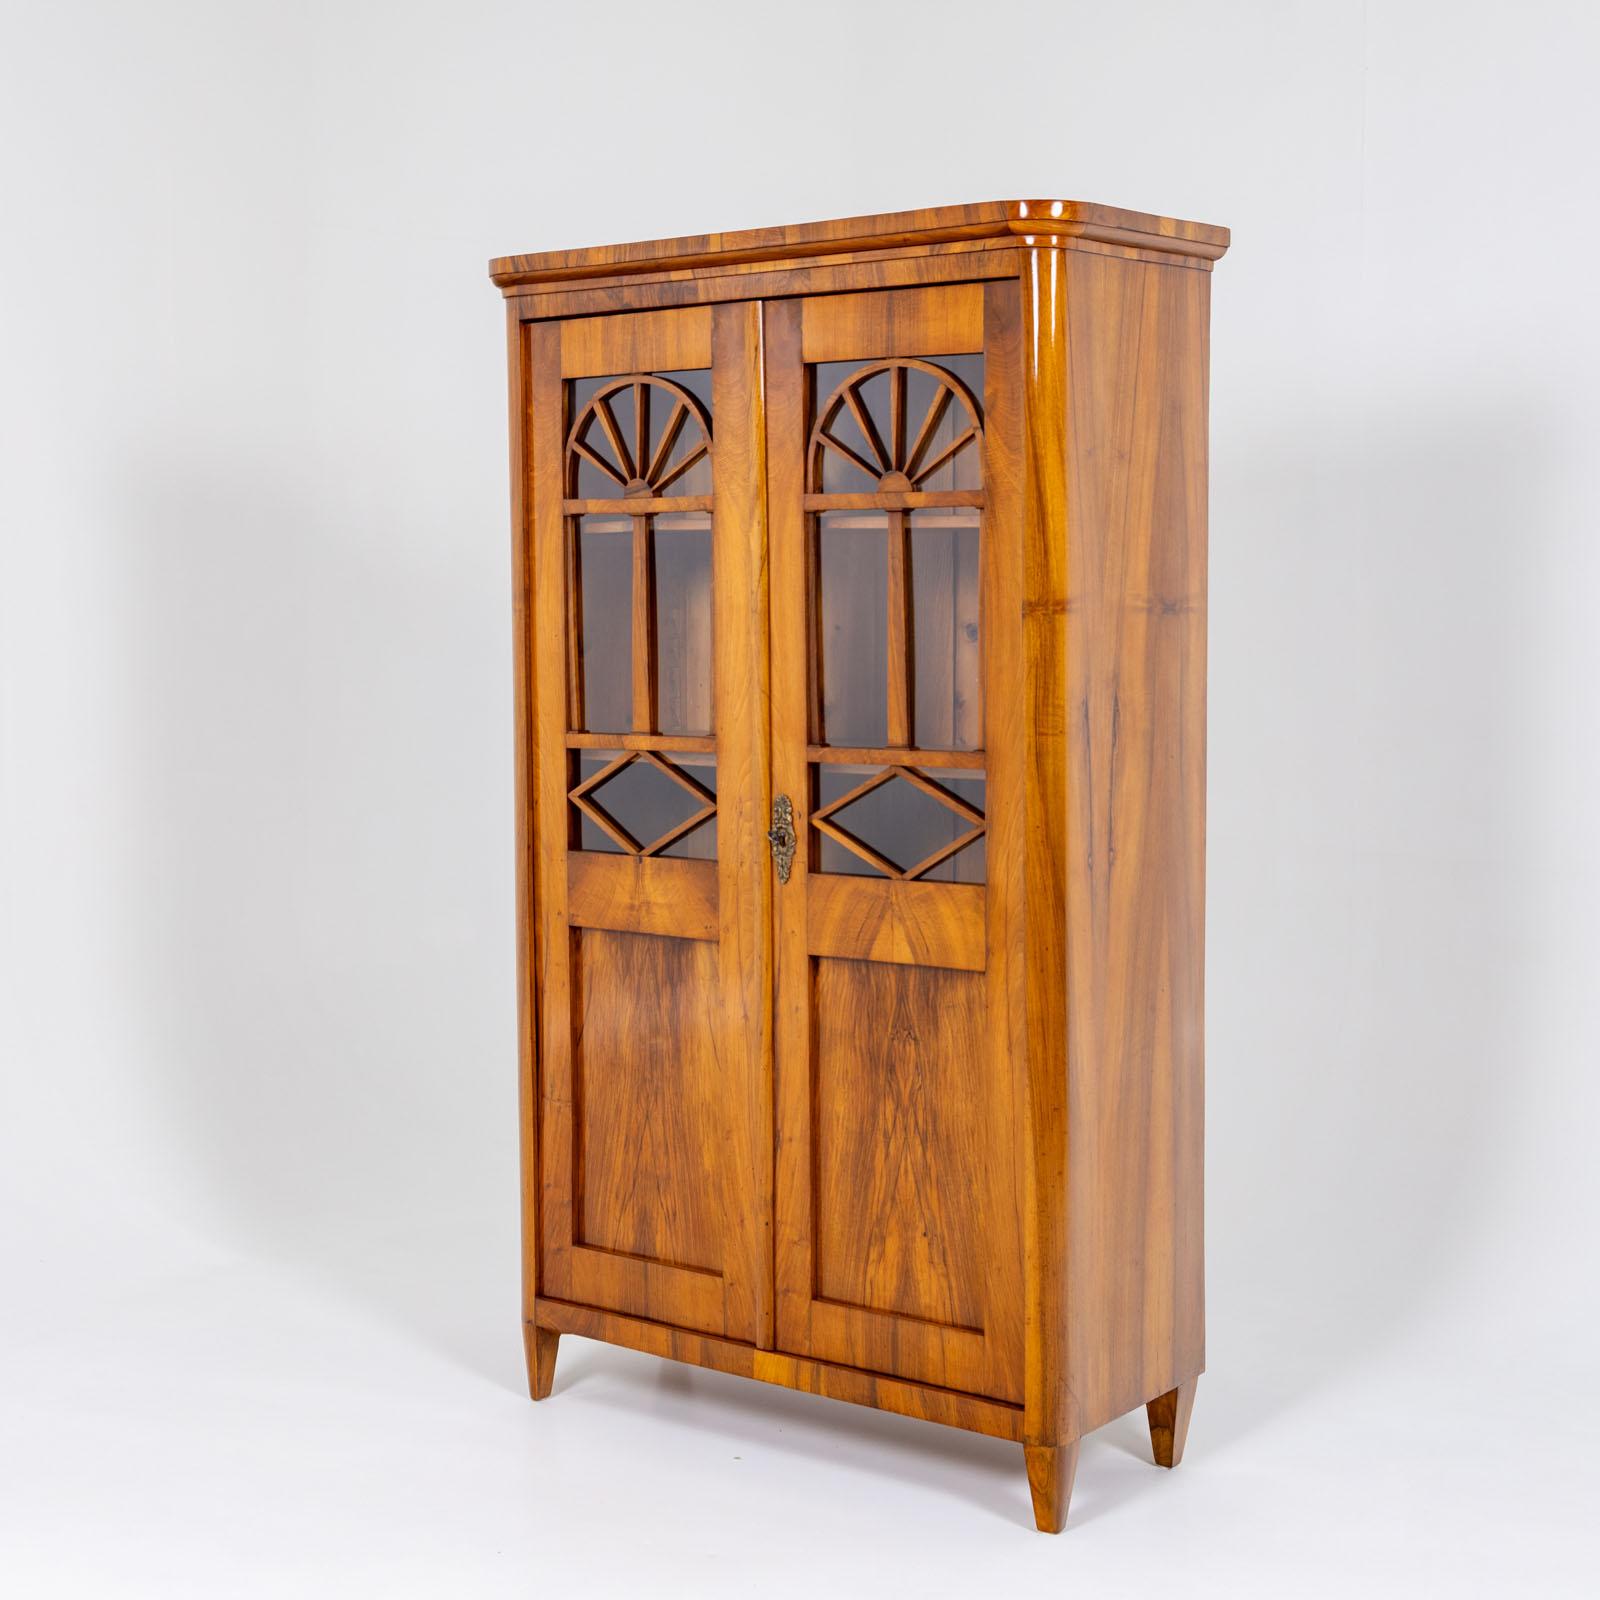 Two-door bookcase with half-glazed doors and beautiful molding with segments and diamond decoration. The interior of the bookcase is fitted with height-adjustable shelves. The cabinet is veneered in walnut and has been restored and polished by hand. 